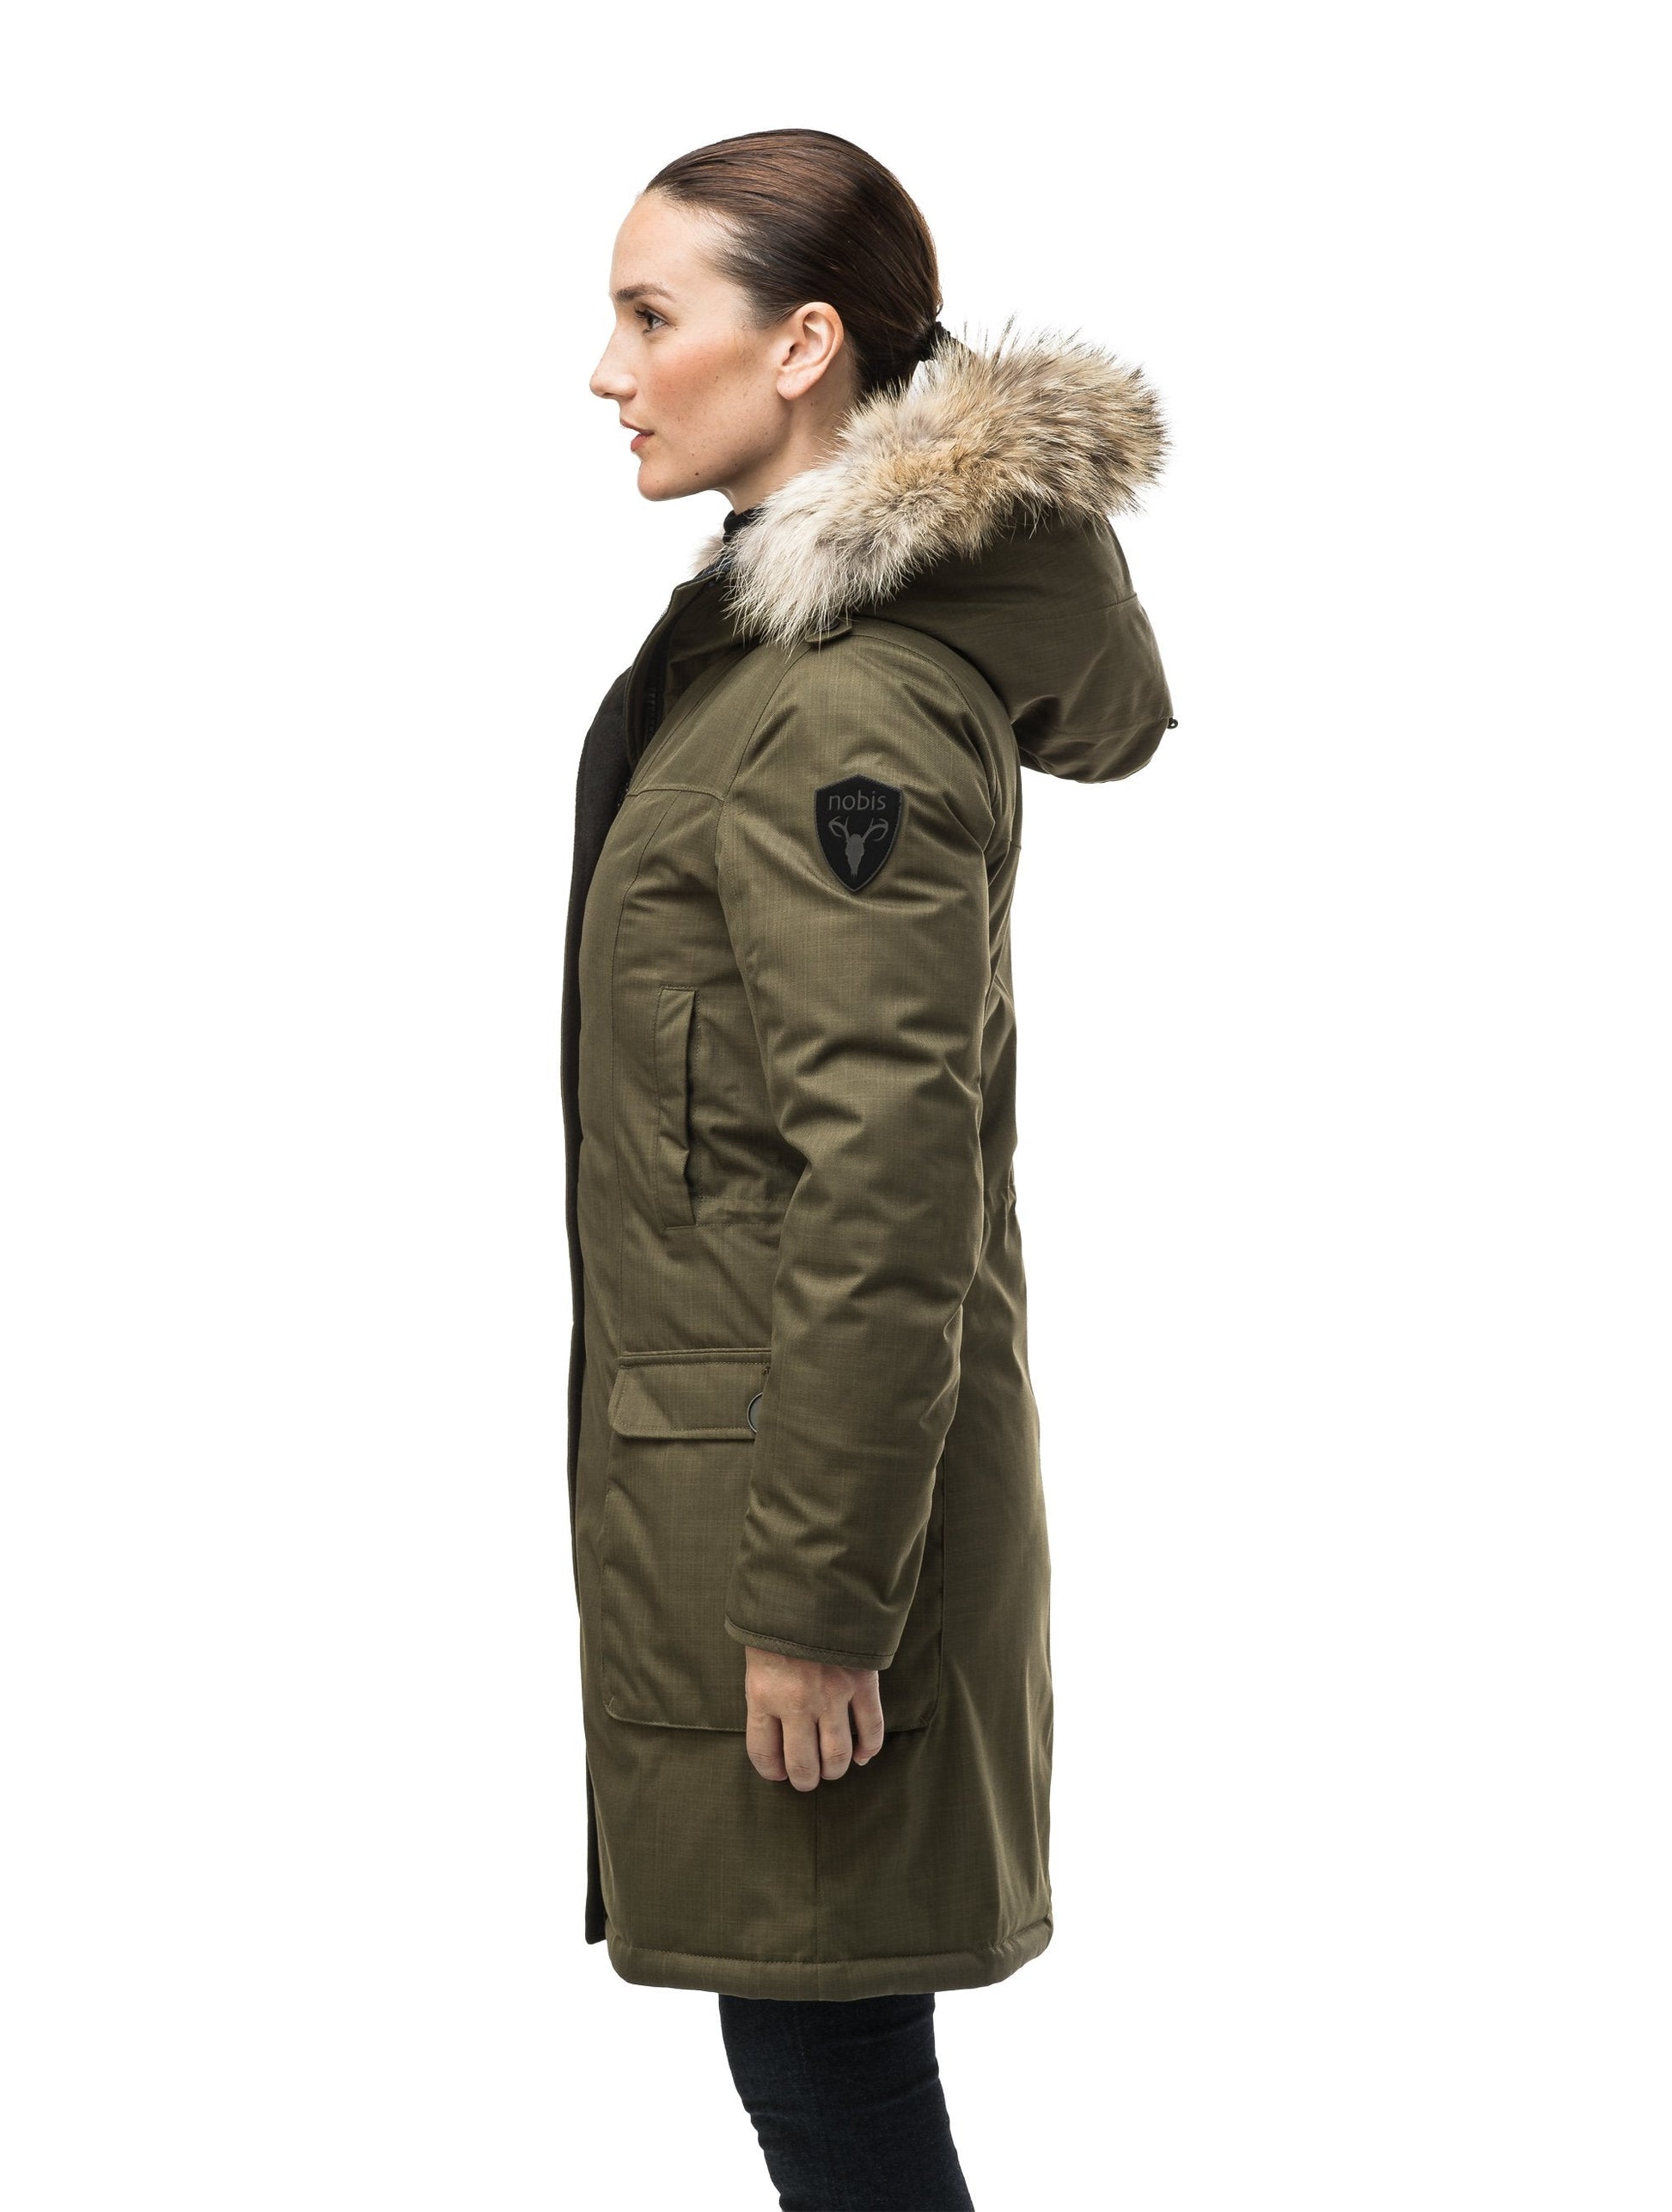 Women's knee length down filled parka with fur trim hood in Fatigue